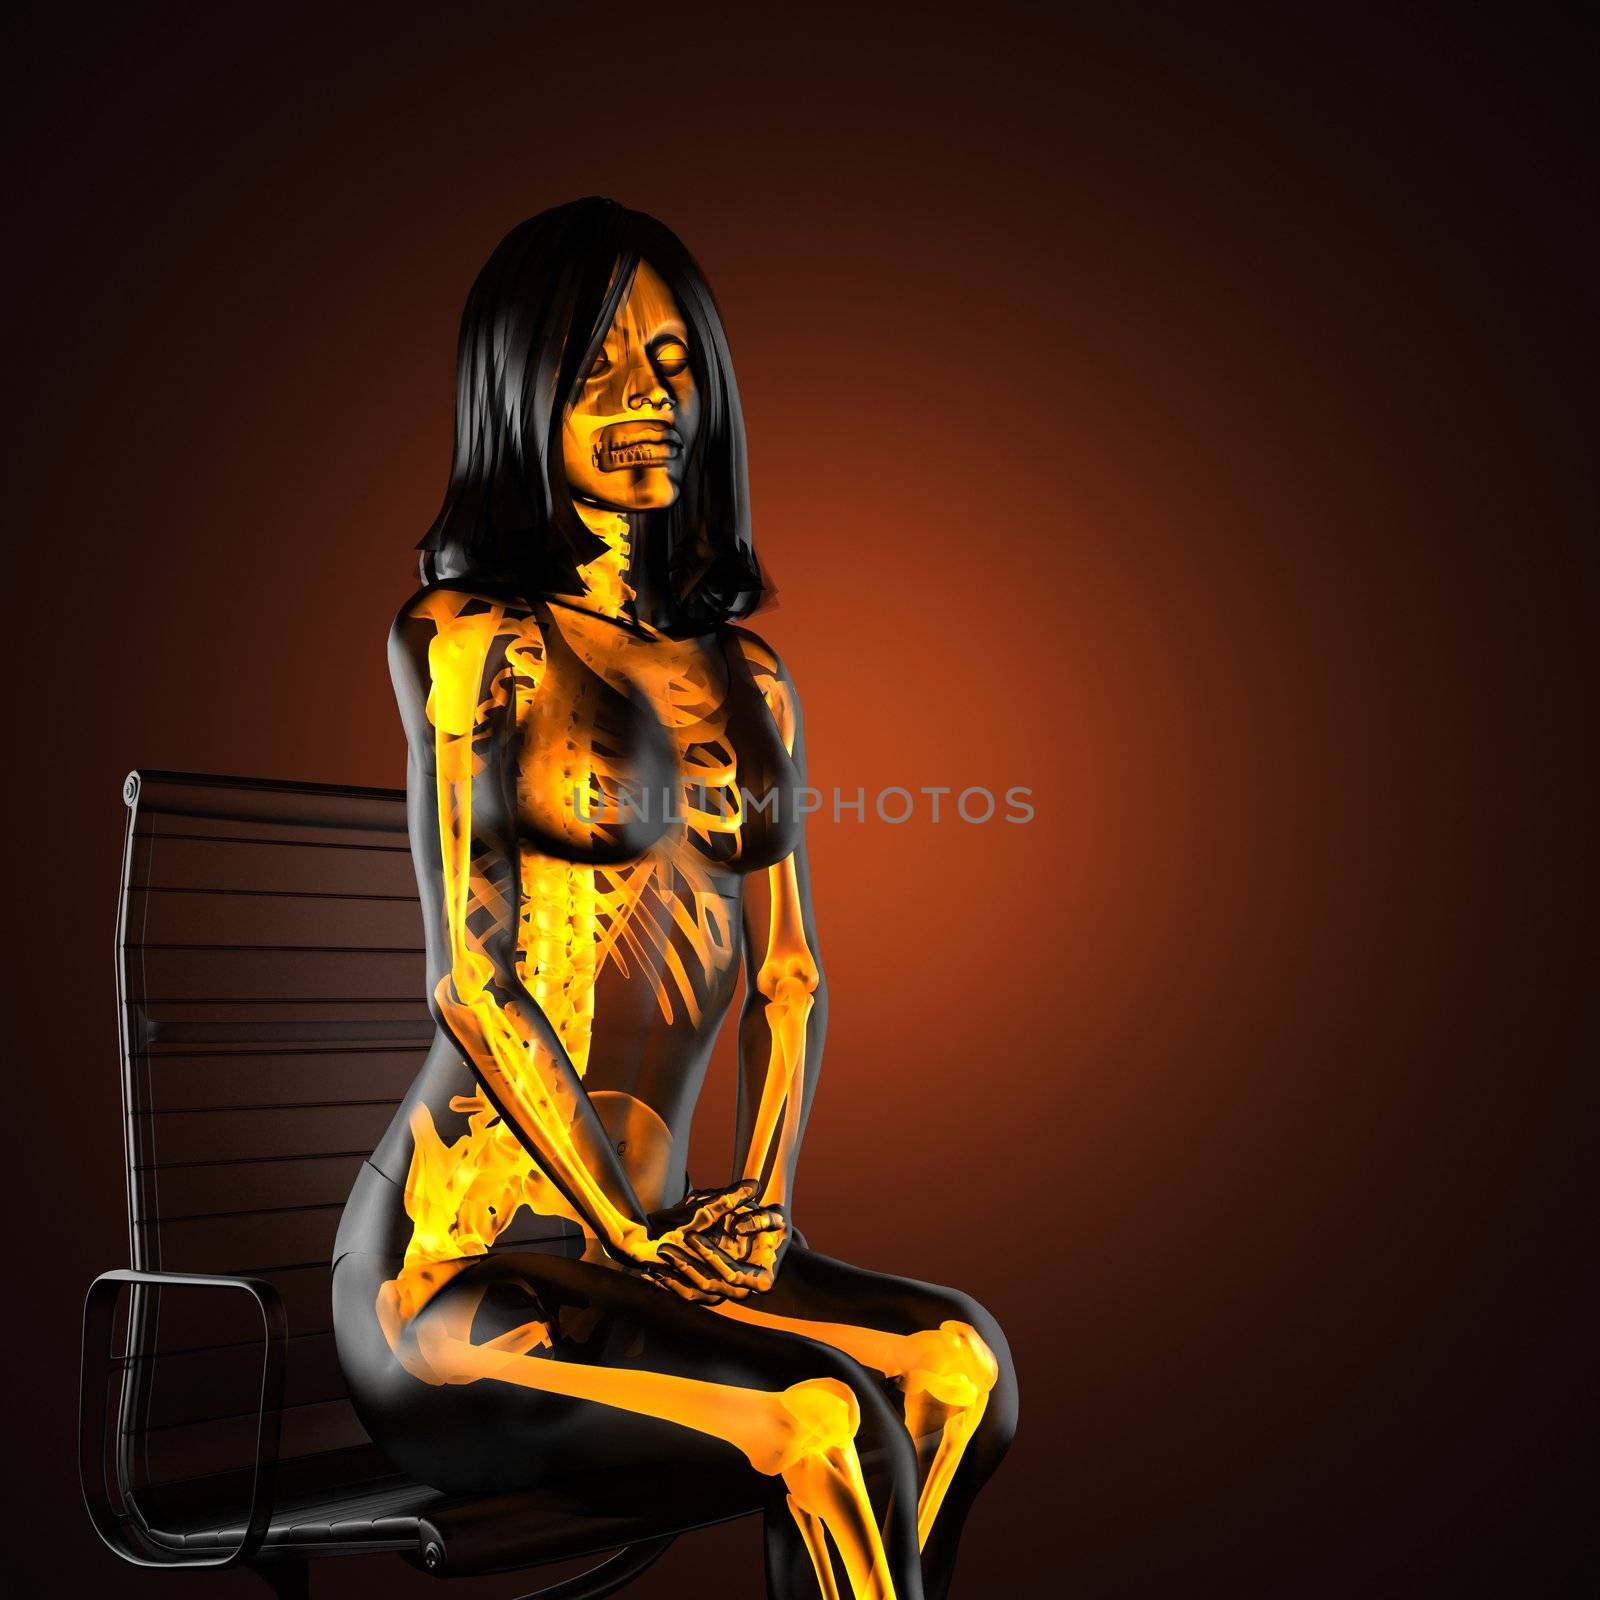 cute woman radiography made in 3D